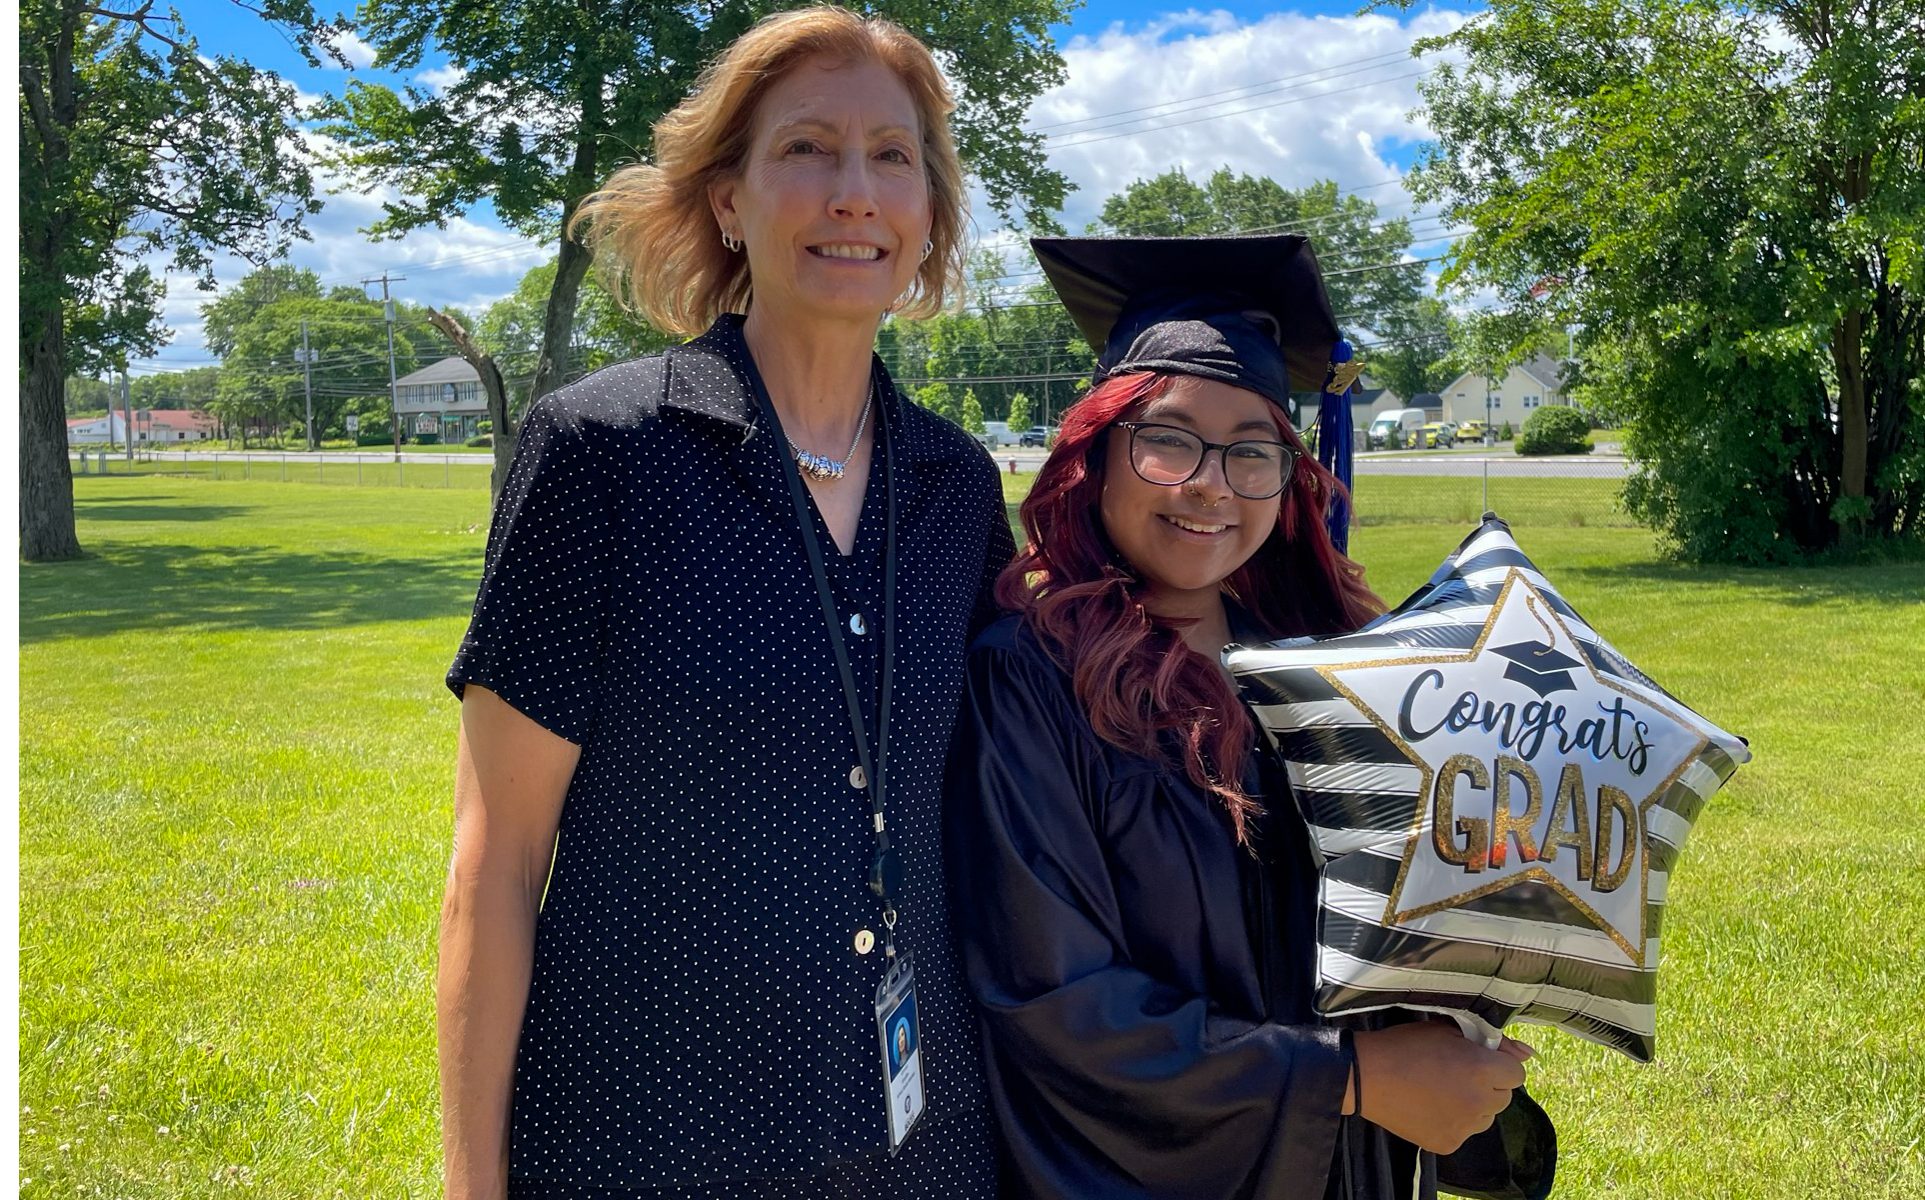 A Capital Region BOCES teacher, who has blond hair and is wearing a black dress with small white polka dots, stands with an arm around a graduate of our Maywood school program. The student is wearing a black graduate's cap and gown, has long, wavy bright red hair, wears black eyeglasses and is holding a star-shaped white and black striped helium ballon with the words "Congrats Grad." They are outside on a bright, sunny day and are looking at and smiling for the camera.